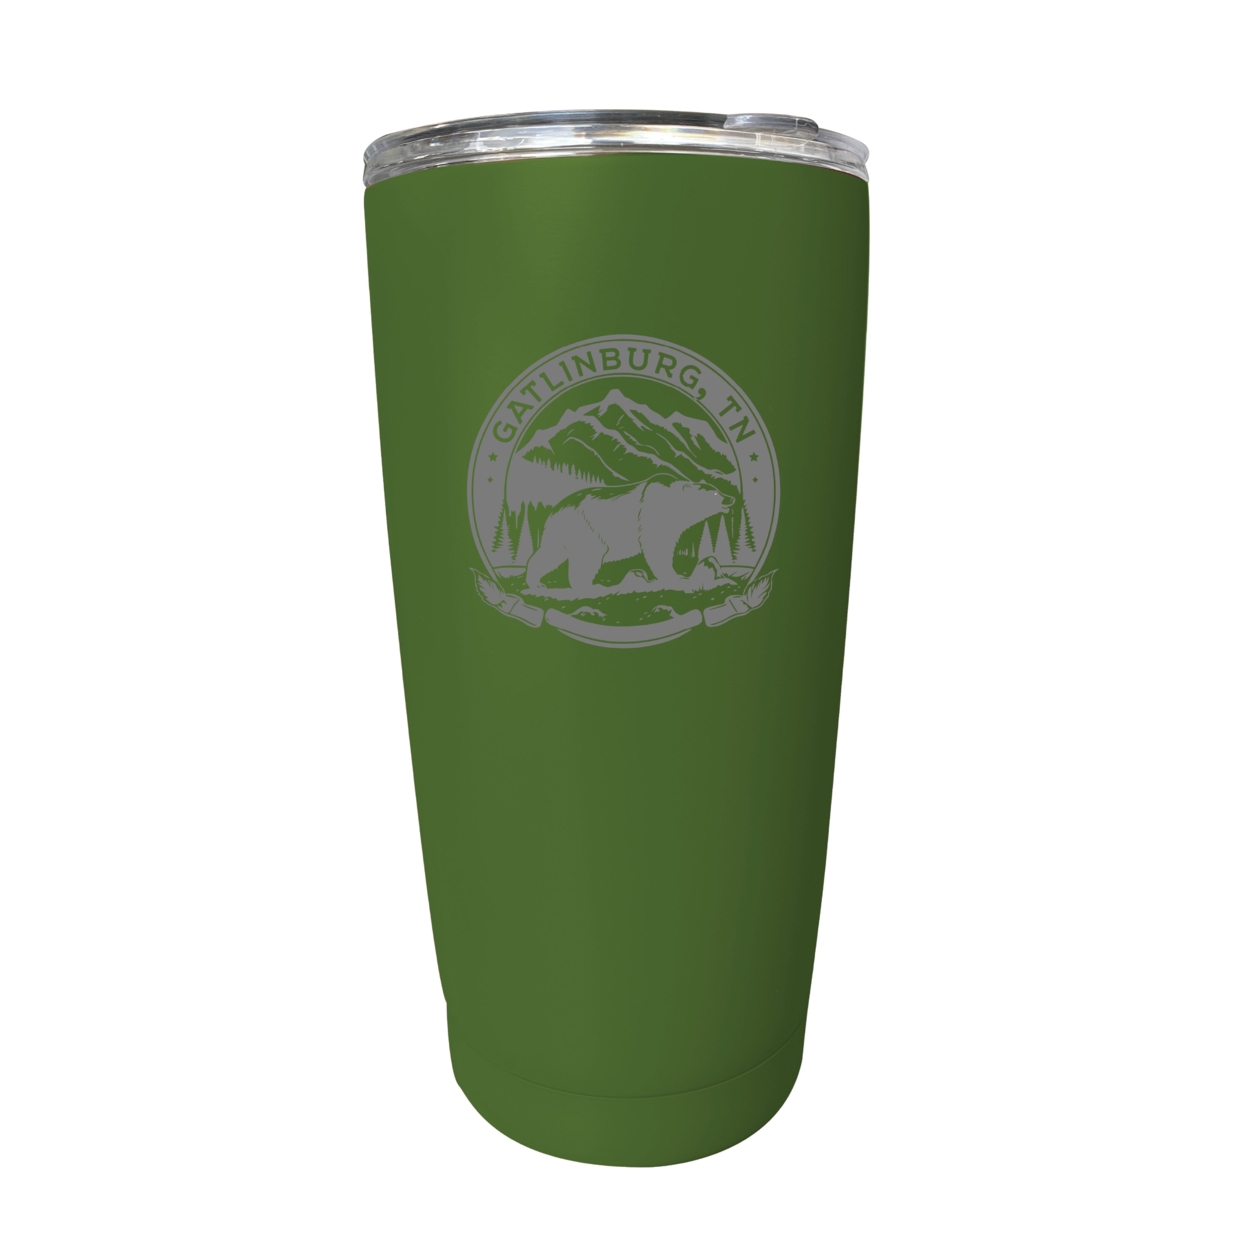 Gatlinburg Tennessee Laser Etched Souvenir 16 Oz Stainless Steel Insulated Tumbler - Navy